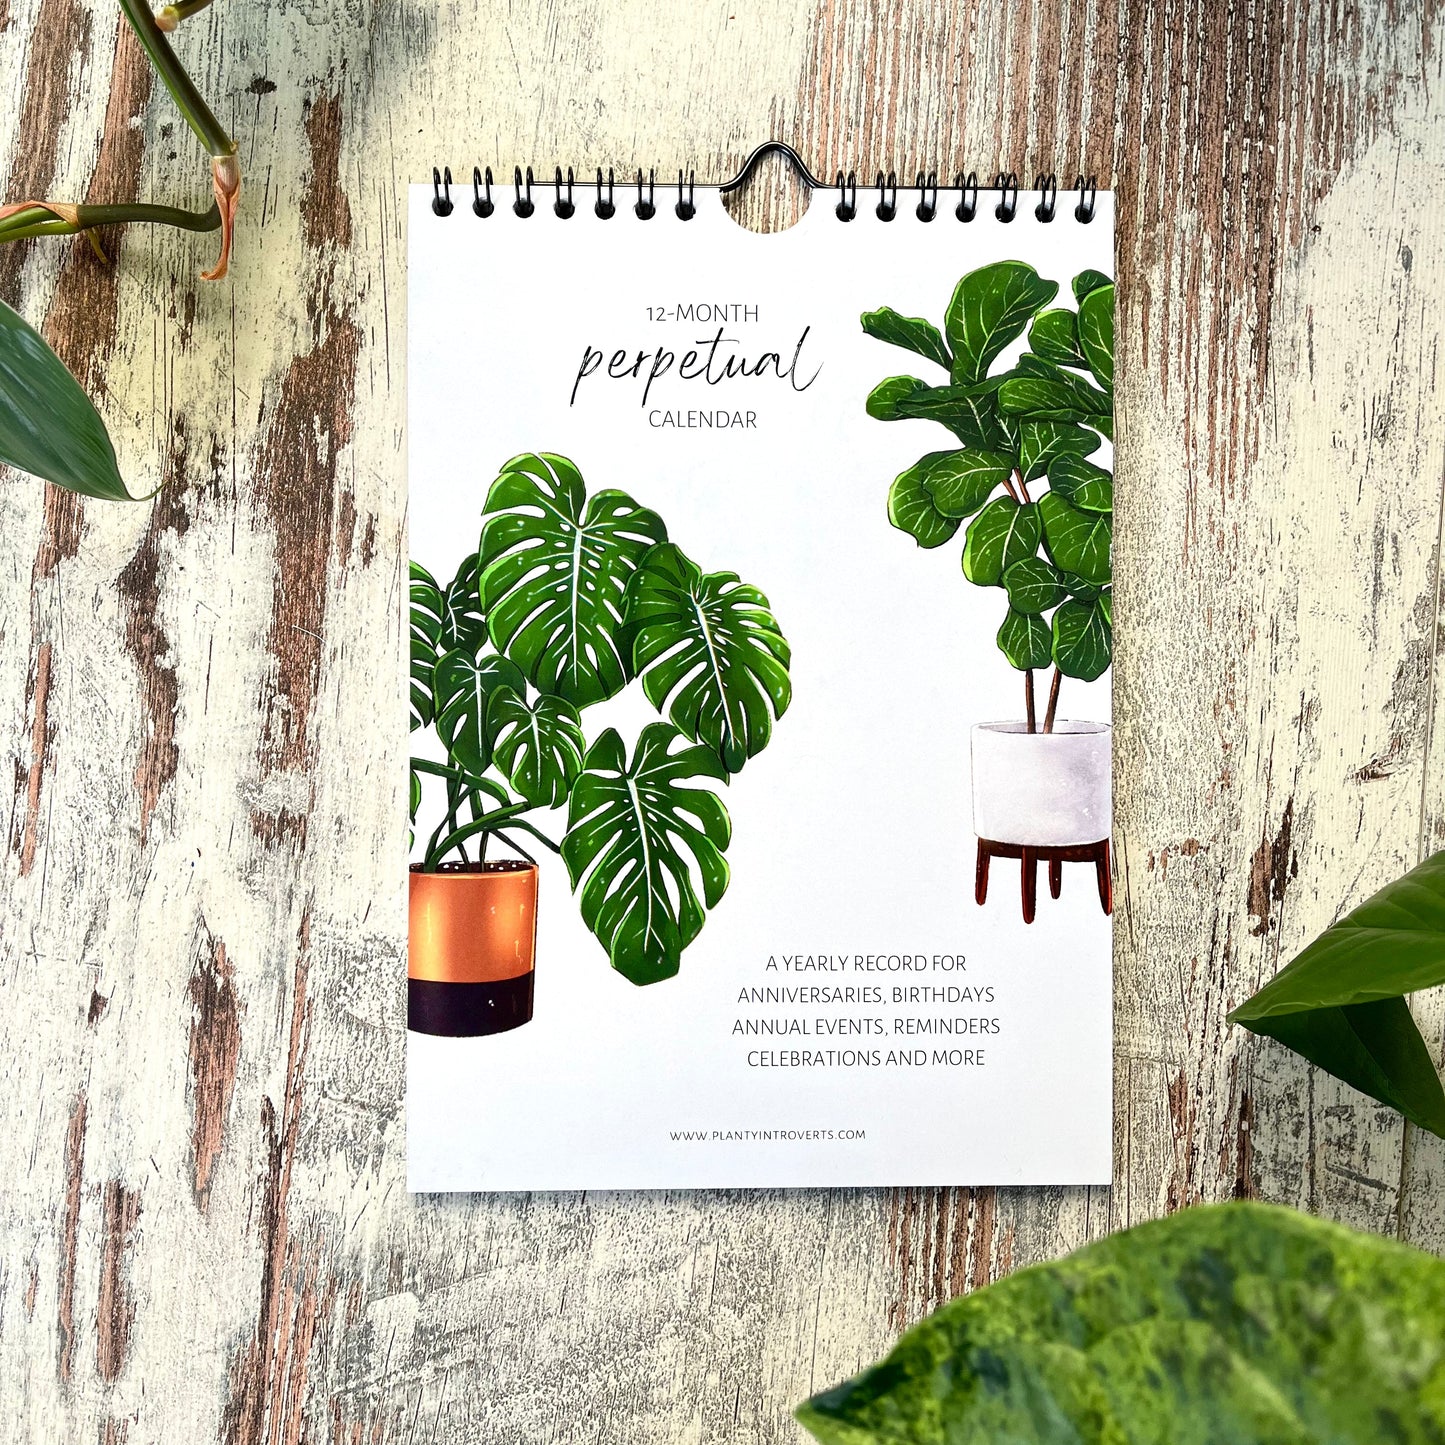 A5 calendar with green plants in without year